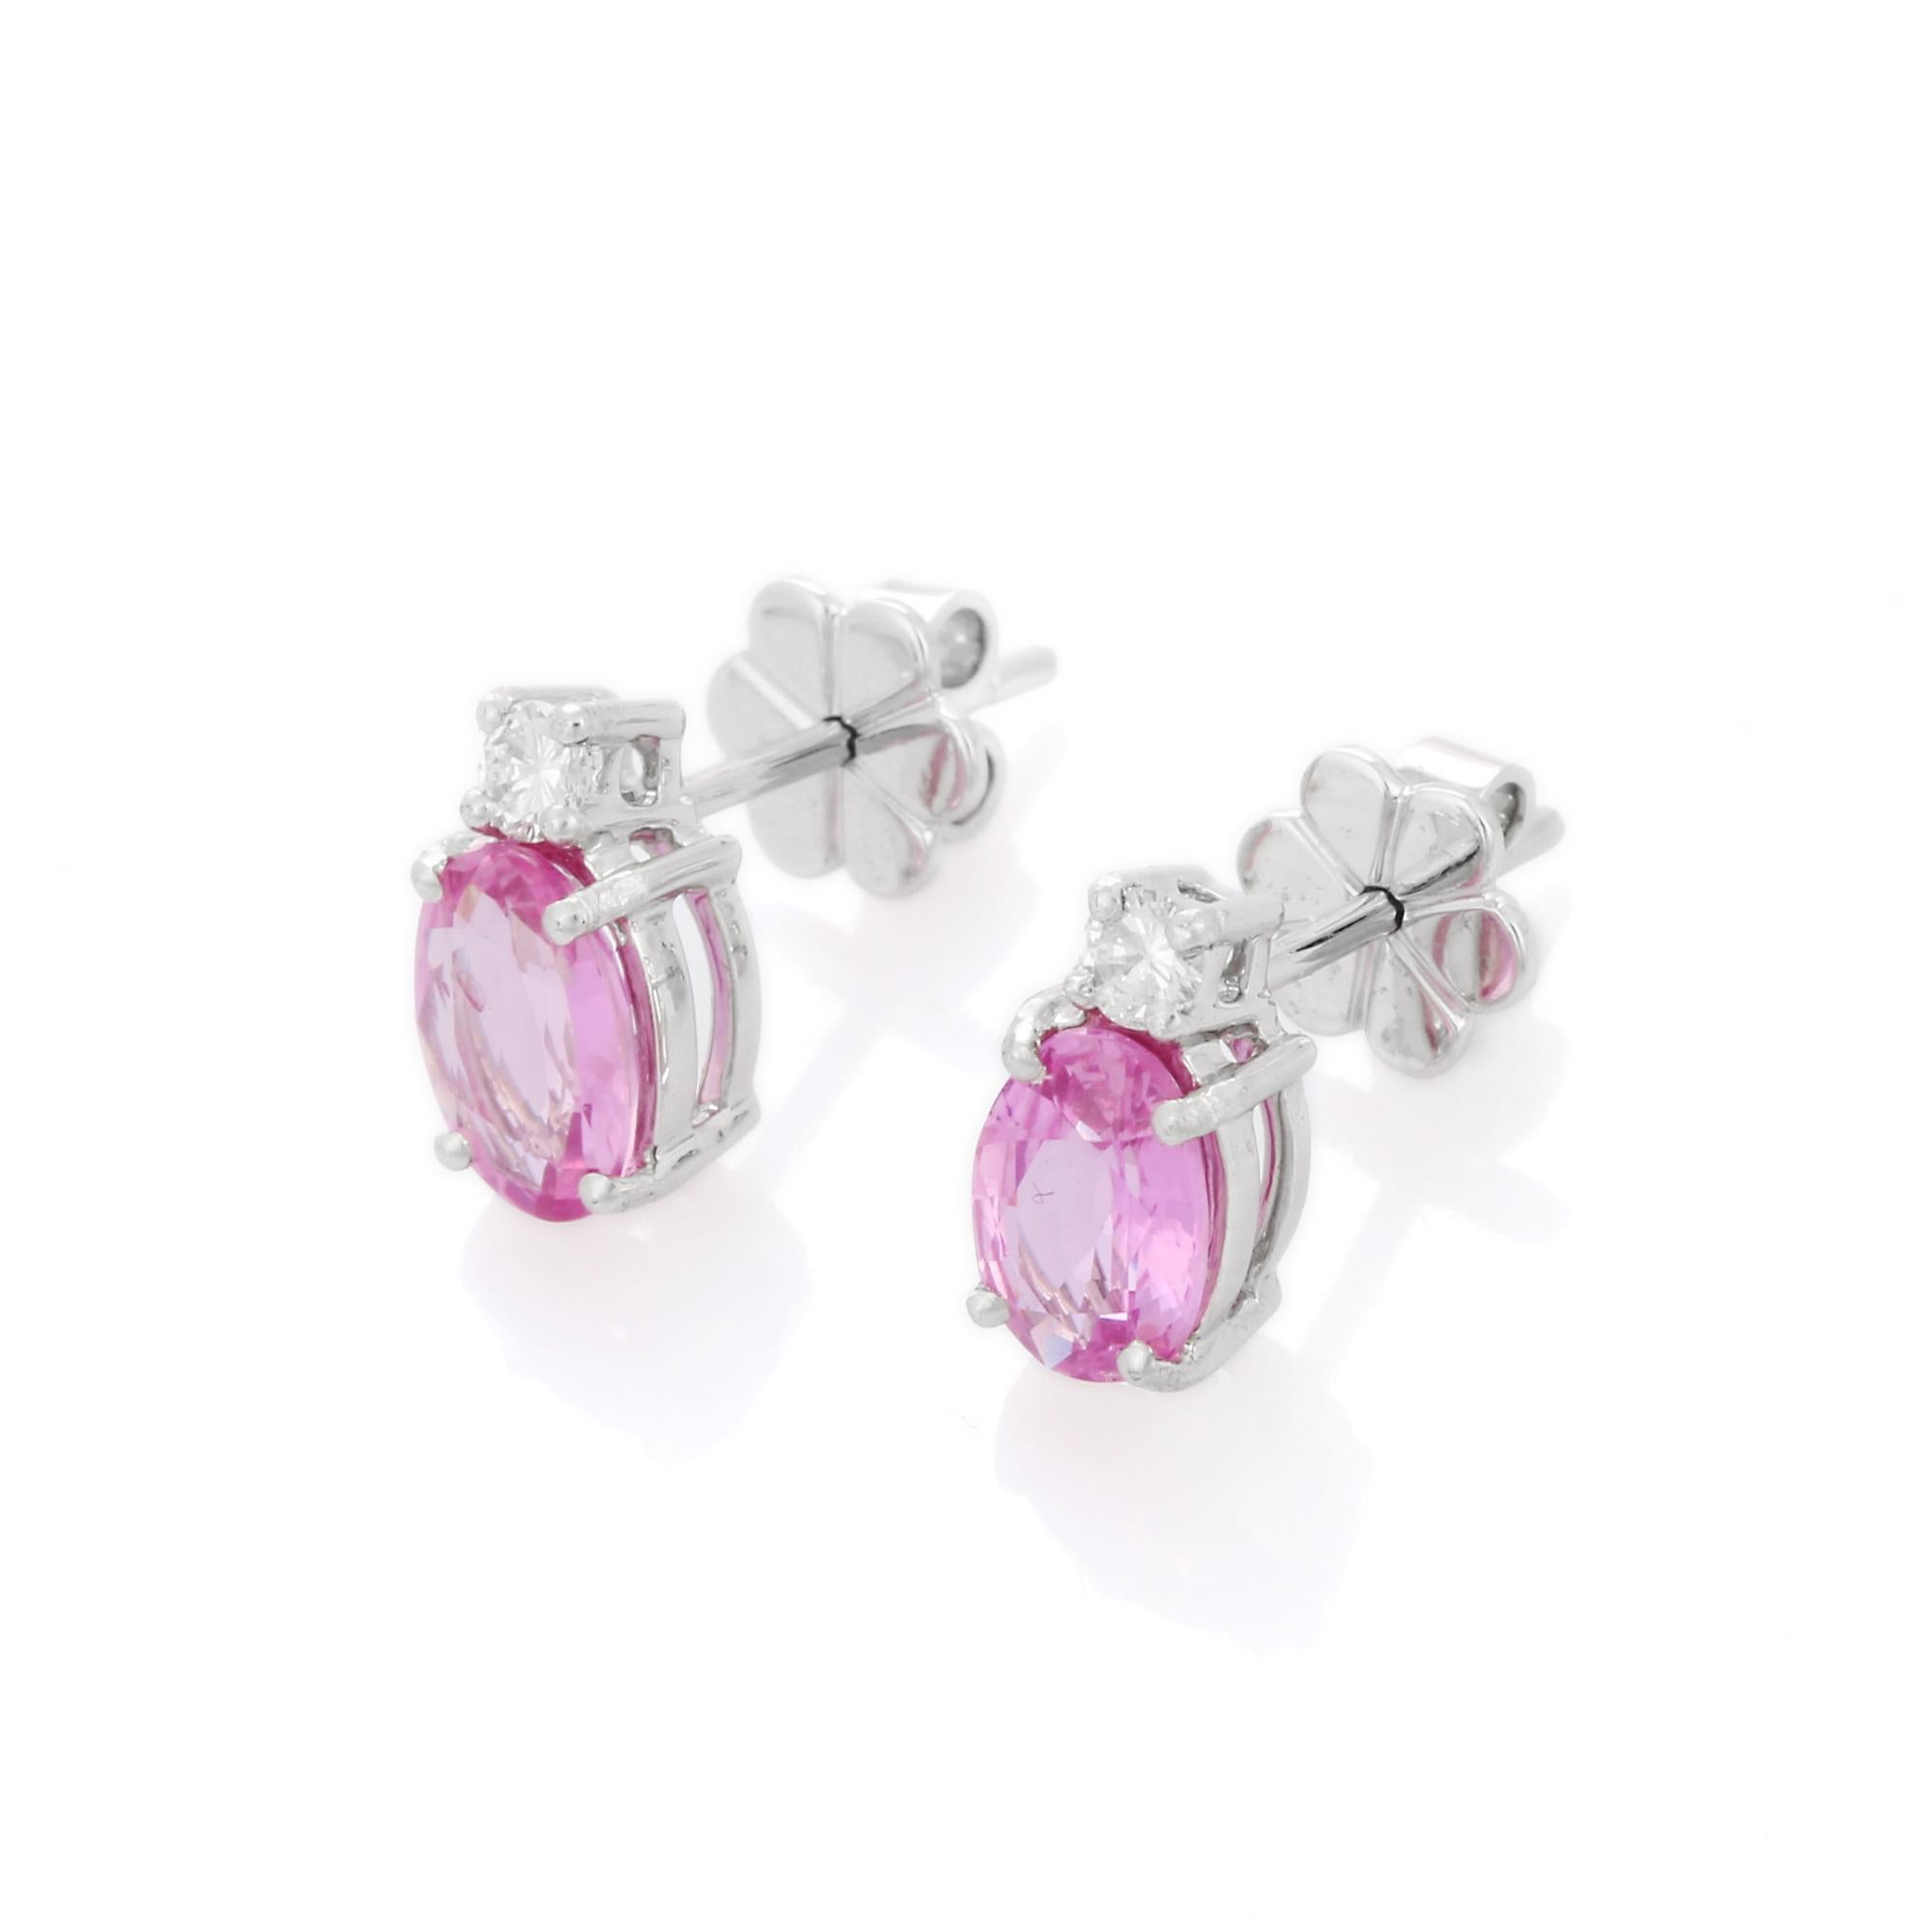 Studs create a subtle beauty while showcasing the colors of the natural precious gemstones and illuminating diamonds making a statement.

Oval cut pink sapphire studs with diamonds in 18K gold. Embrace your look with these stunning pair of earrings